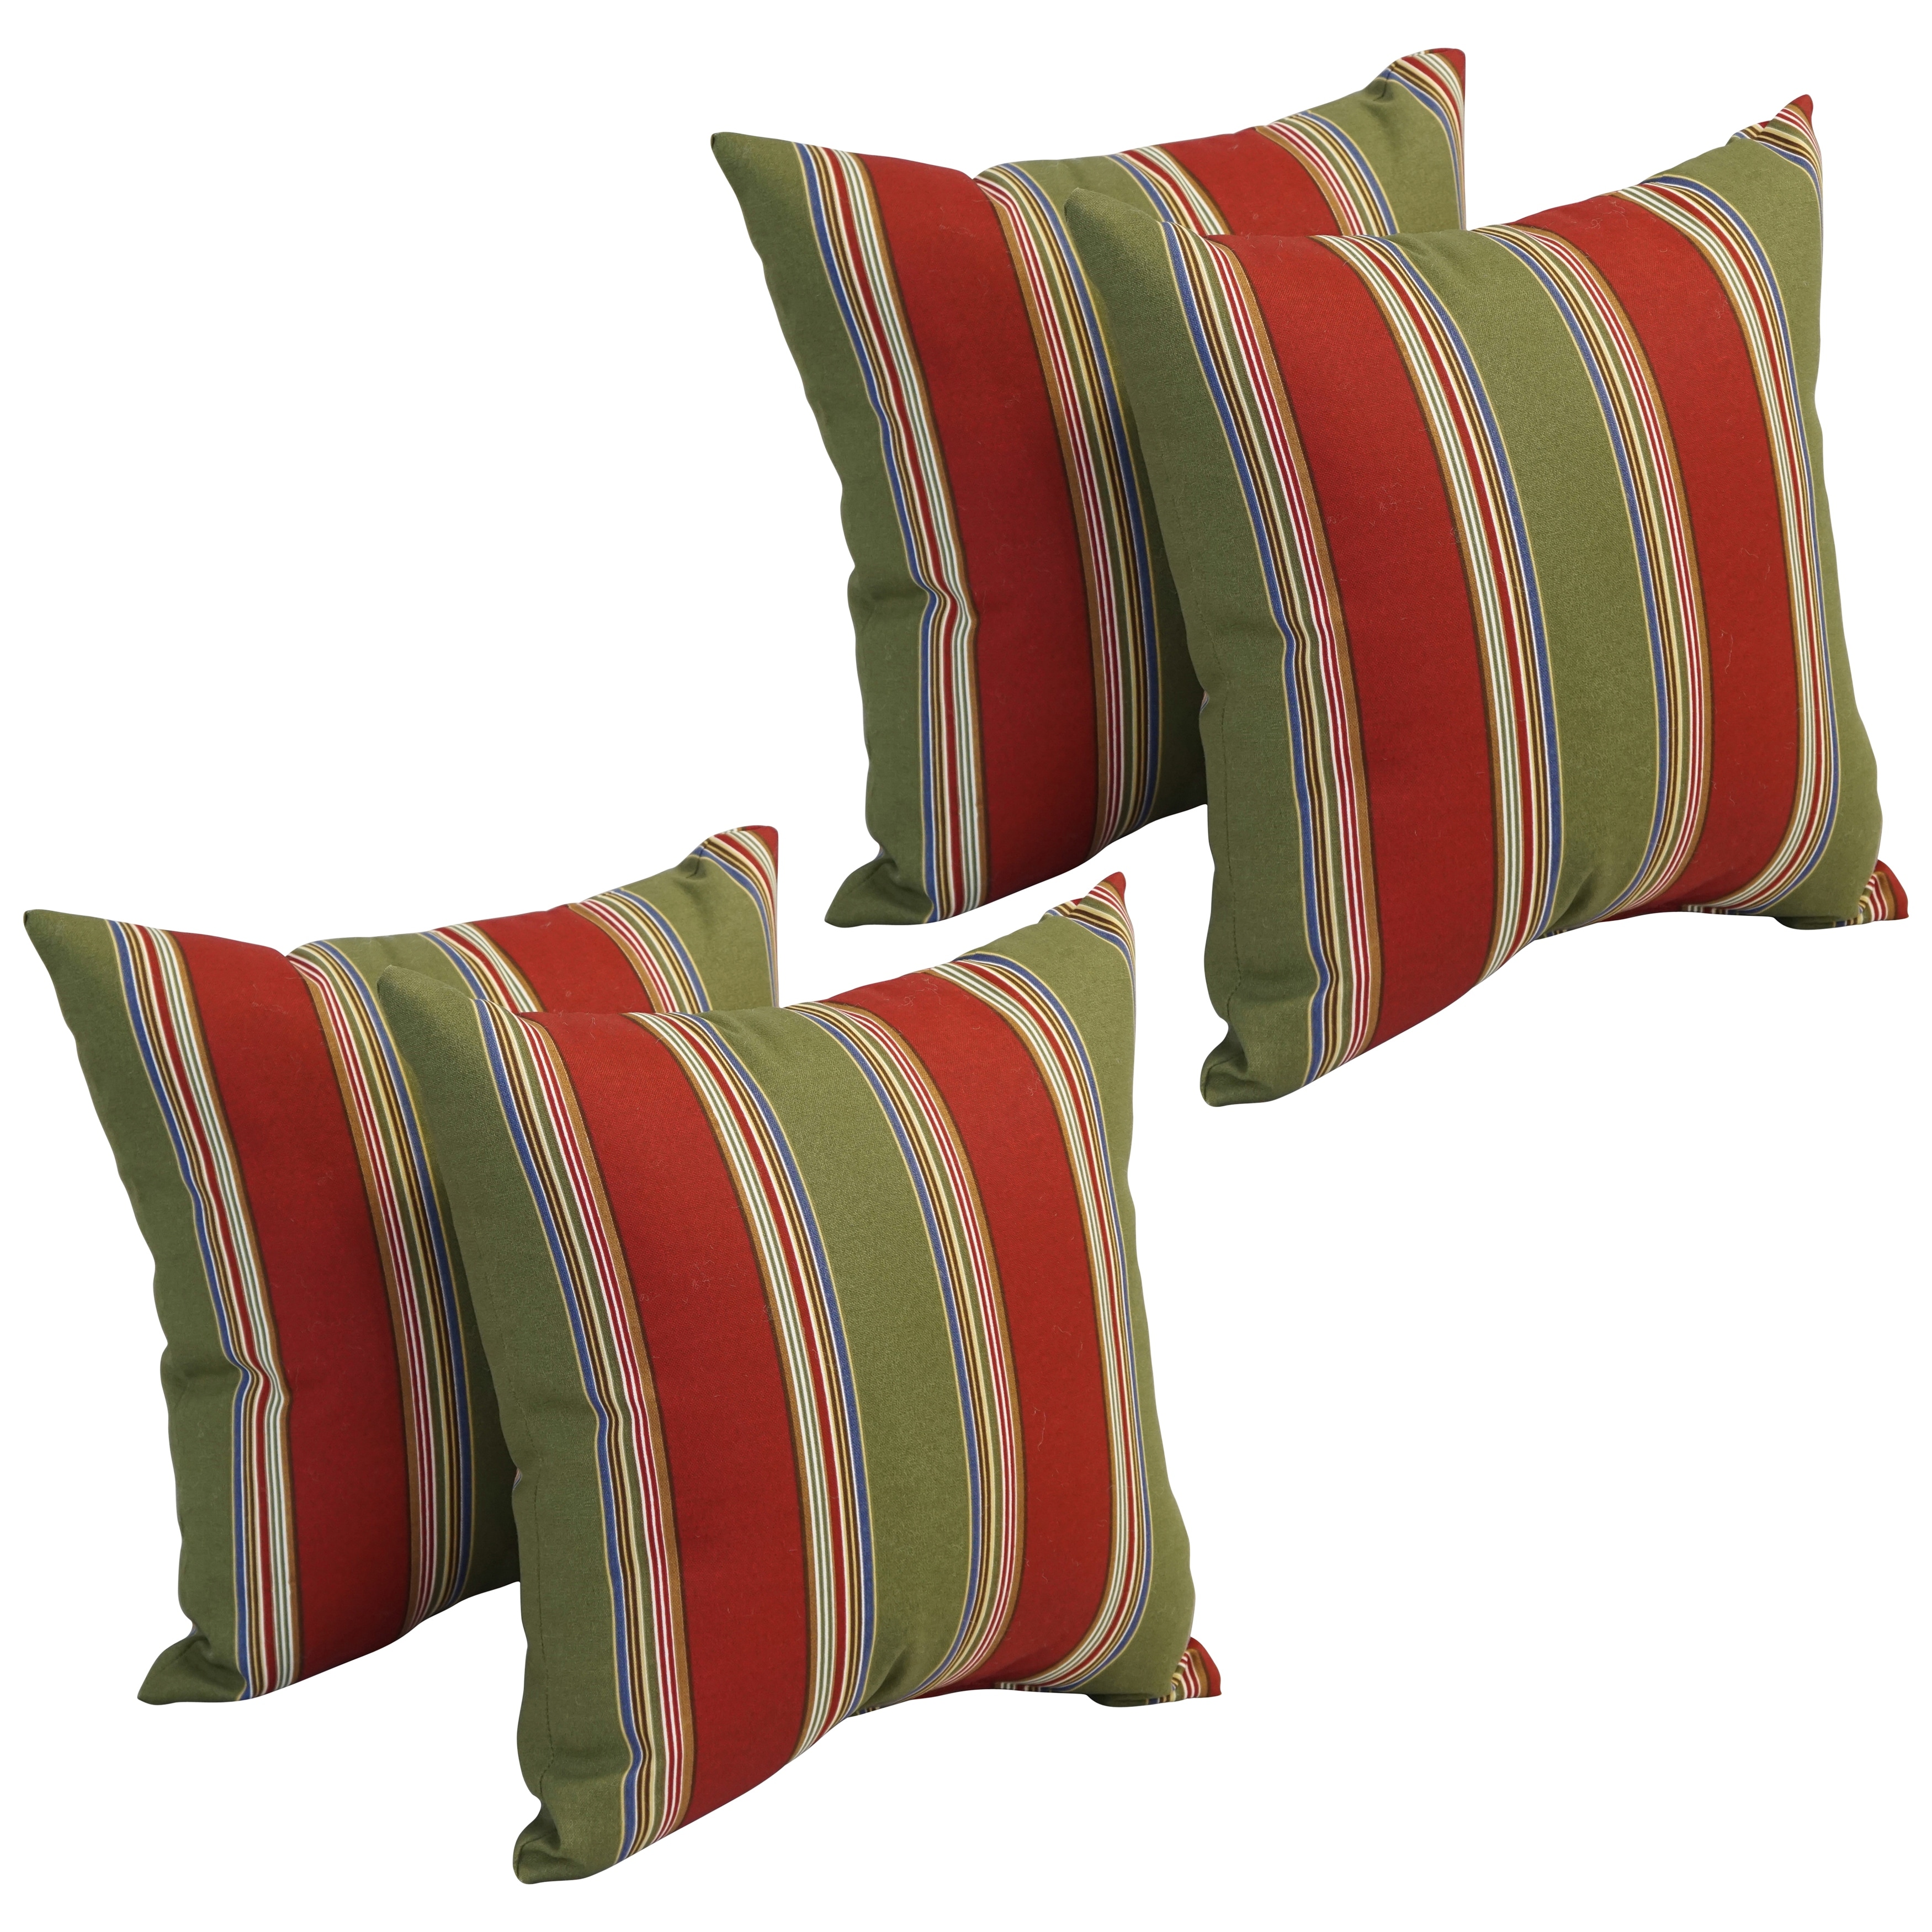 https://ak1.ostkcdn.com/images/products/is/images/direct/8a2bb5e0b2c0e8d3b999bdf9f29878b106891be9/17-inch-Square-Polyester-Outdoor-Throw-Pillows-%28Set-of-4%29.jpg